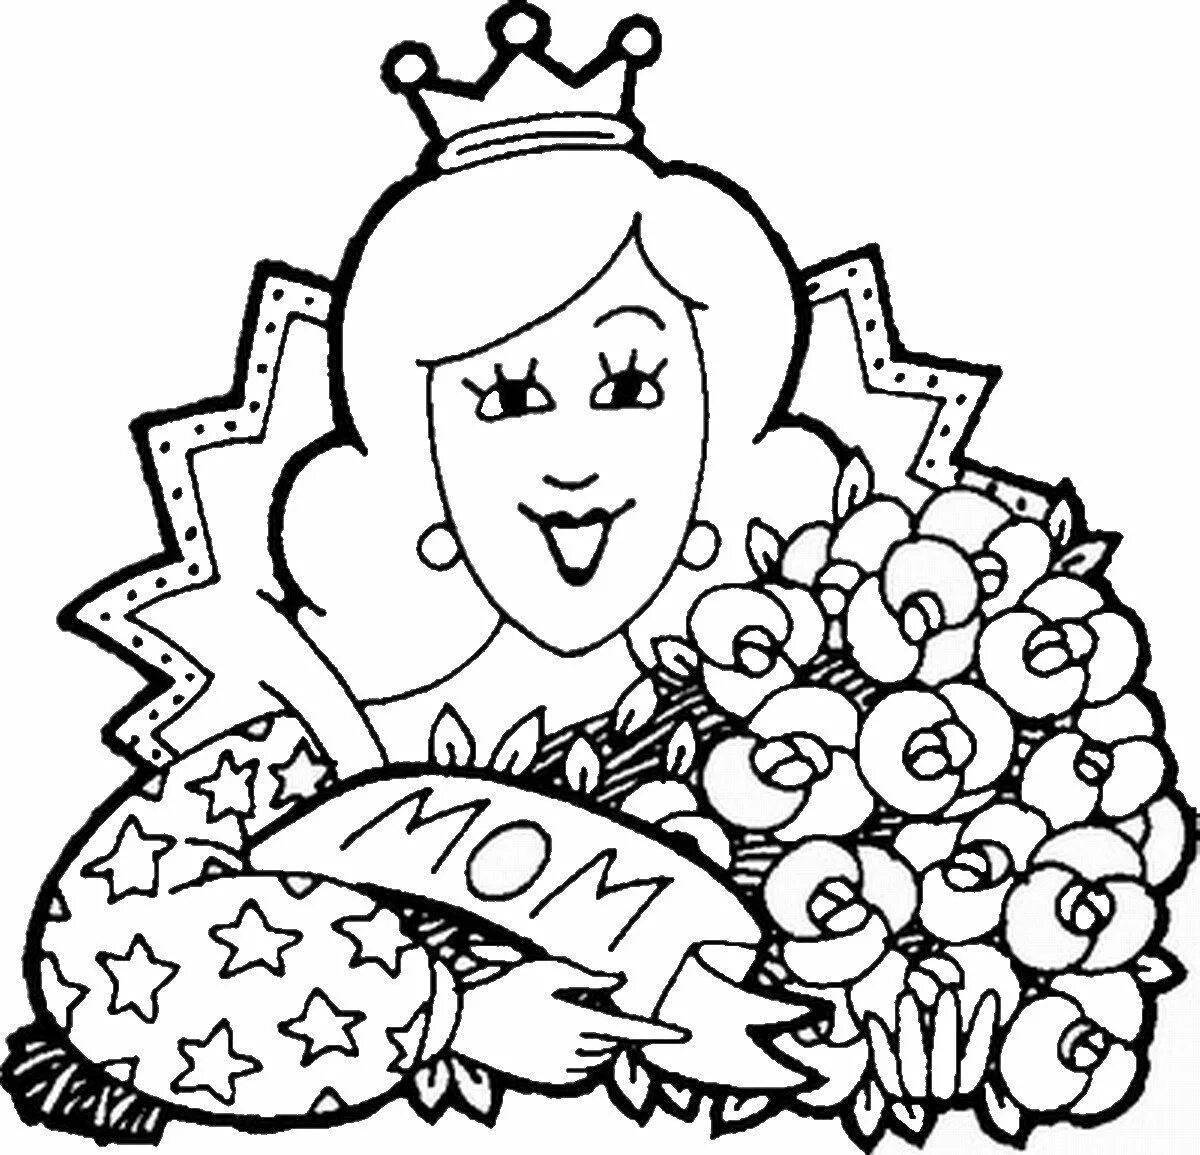 Coloring page cherished mother